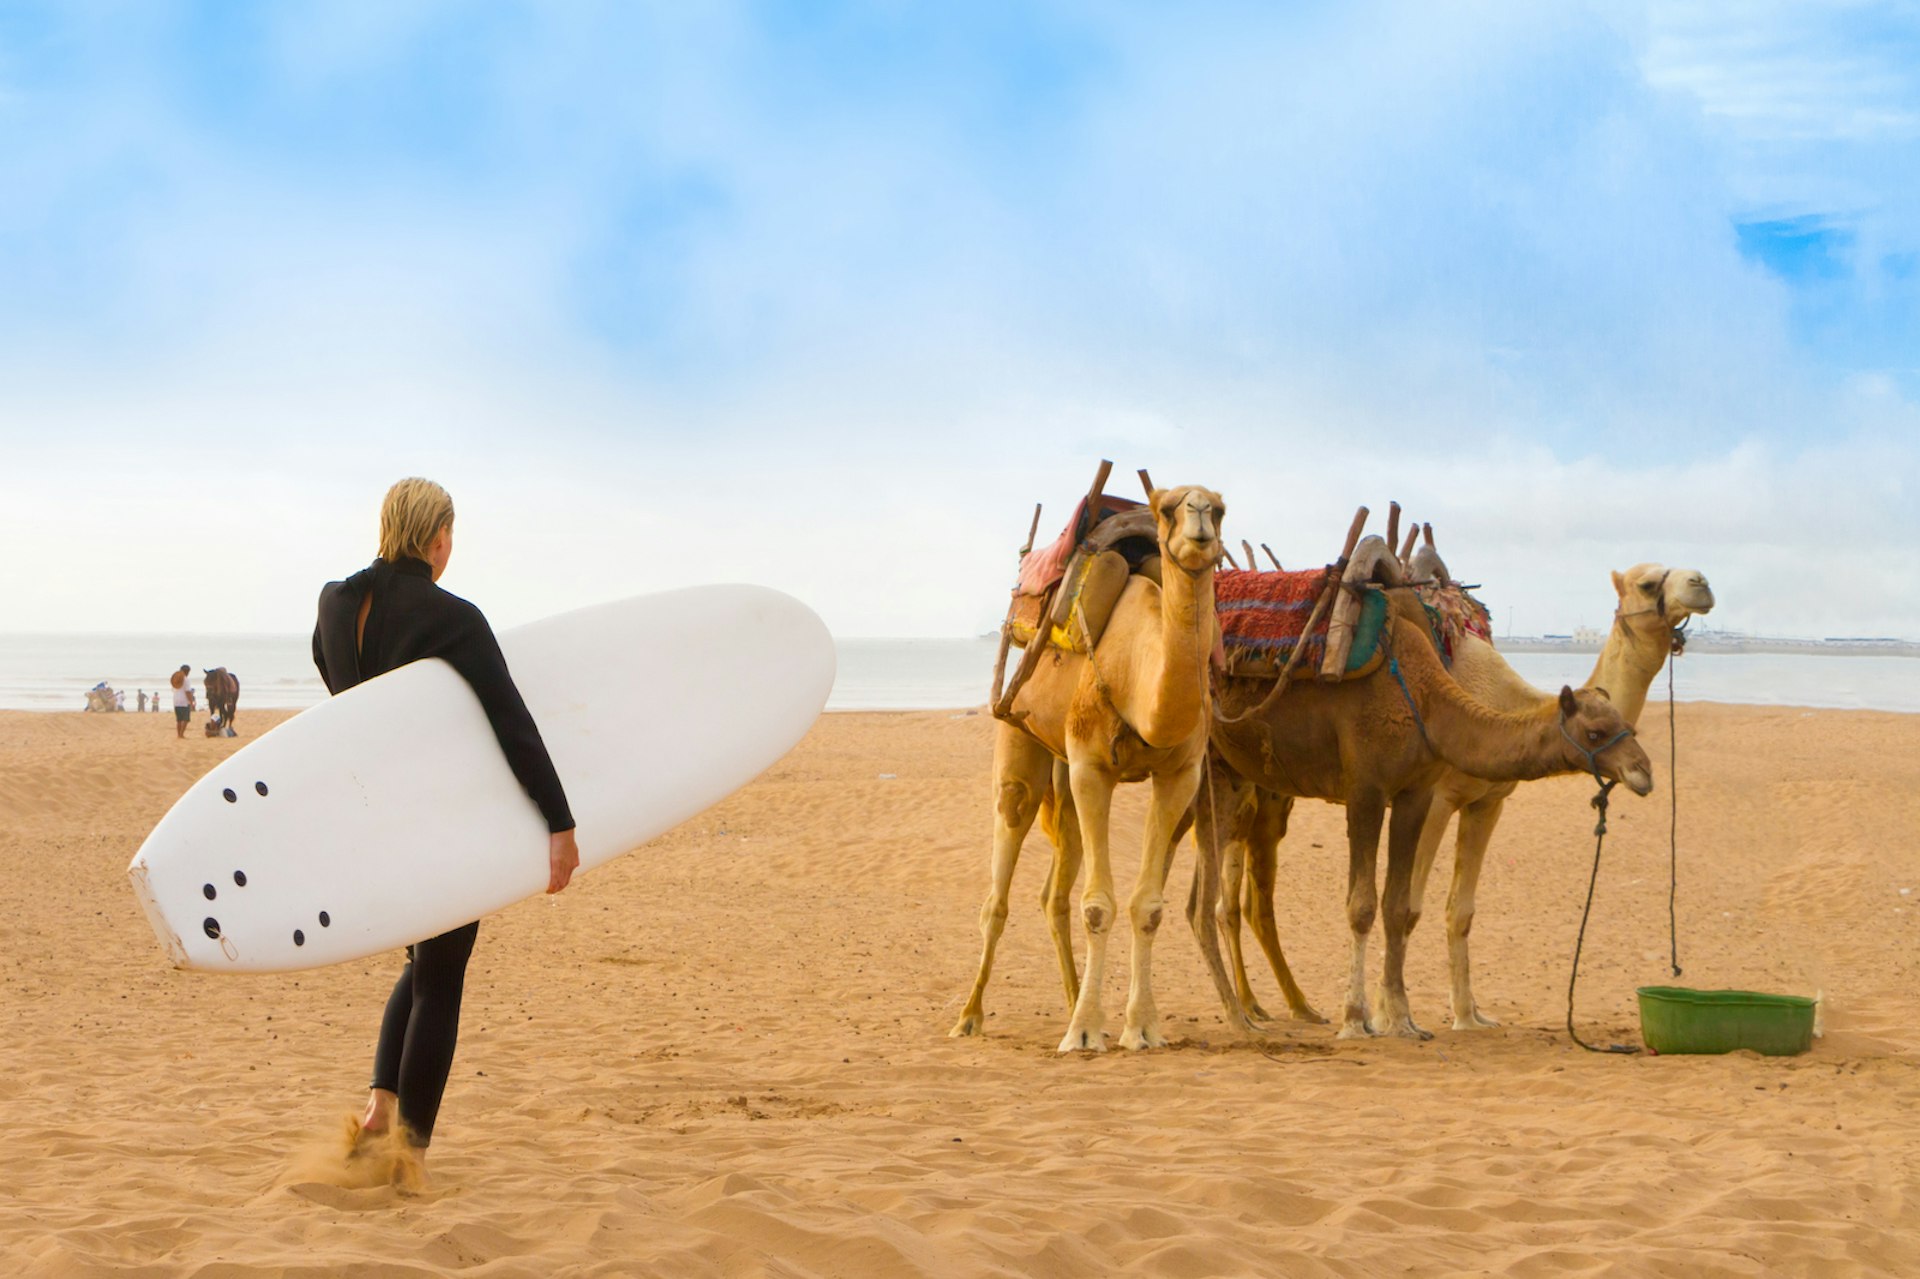 A surfer and two camels on the beach at Essaouira, Morocco 